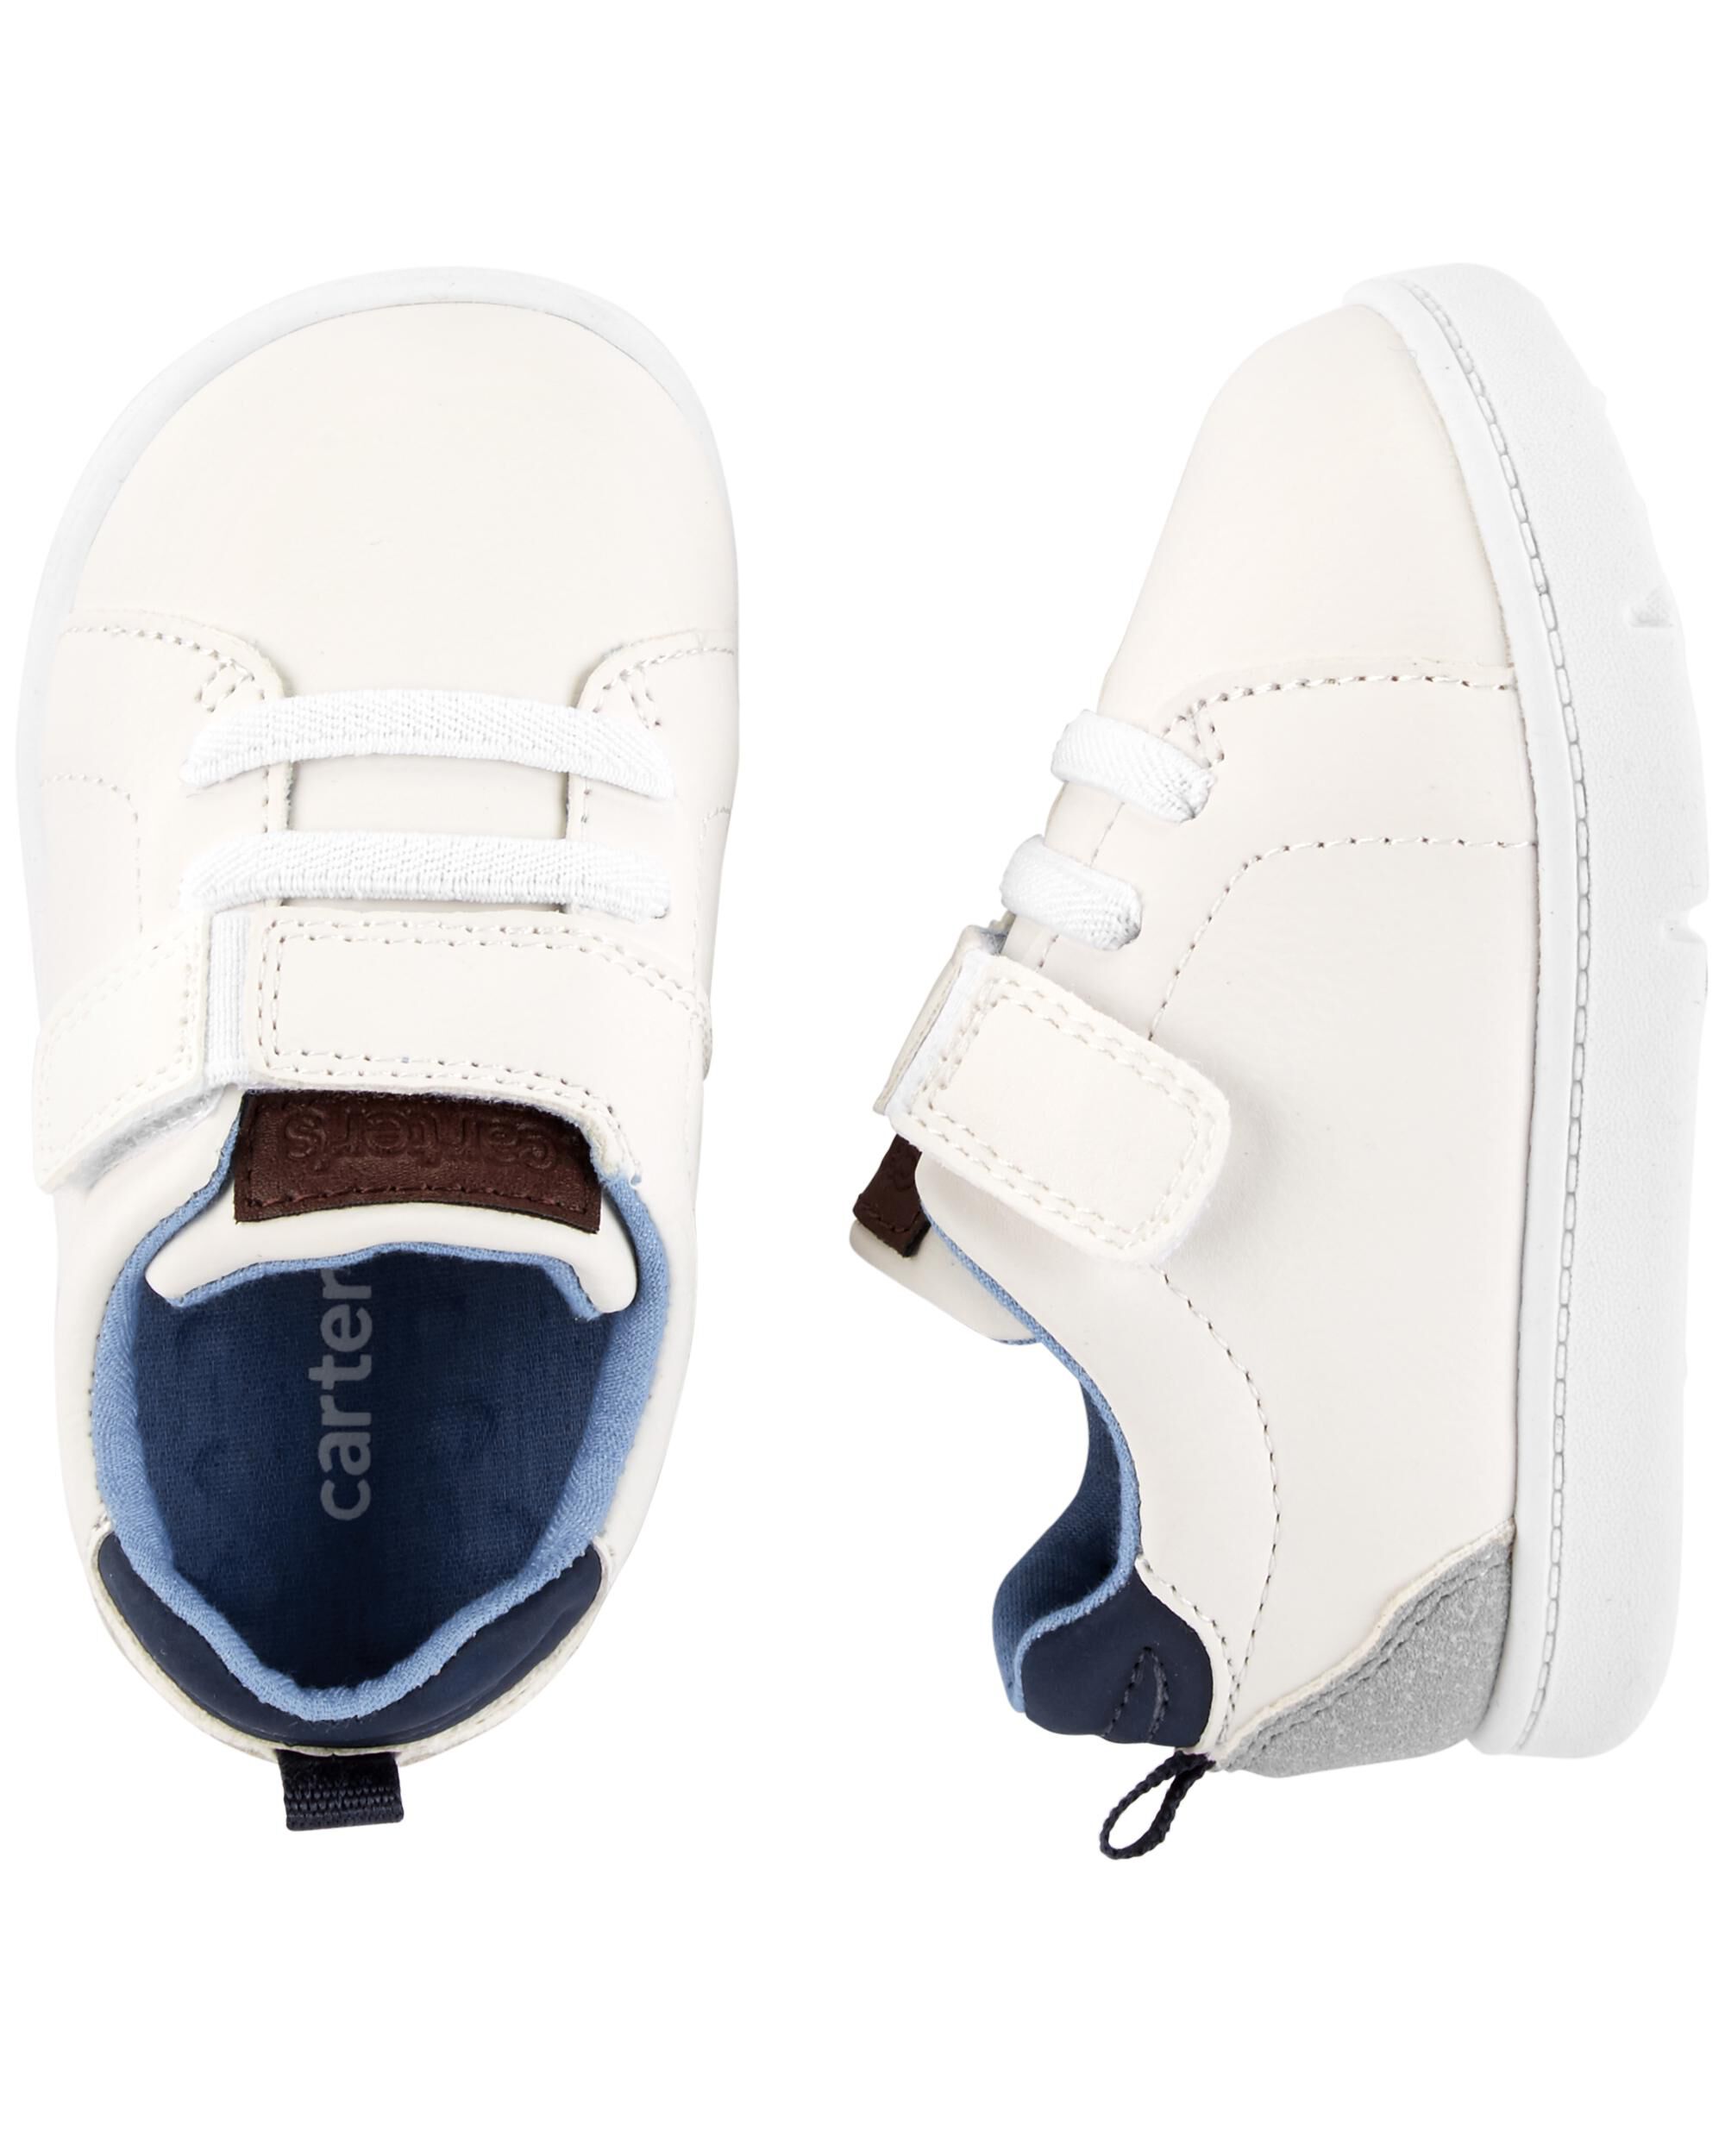 Carter's Every Step Sneakers | carters.com